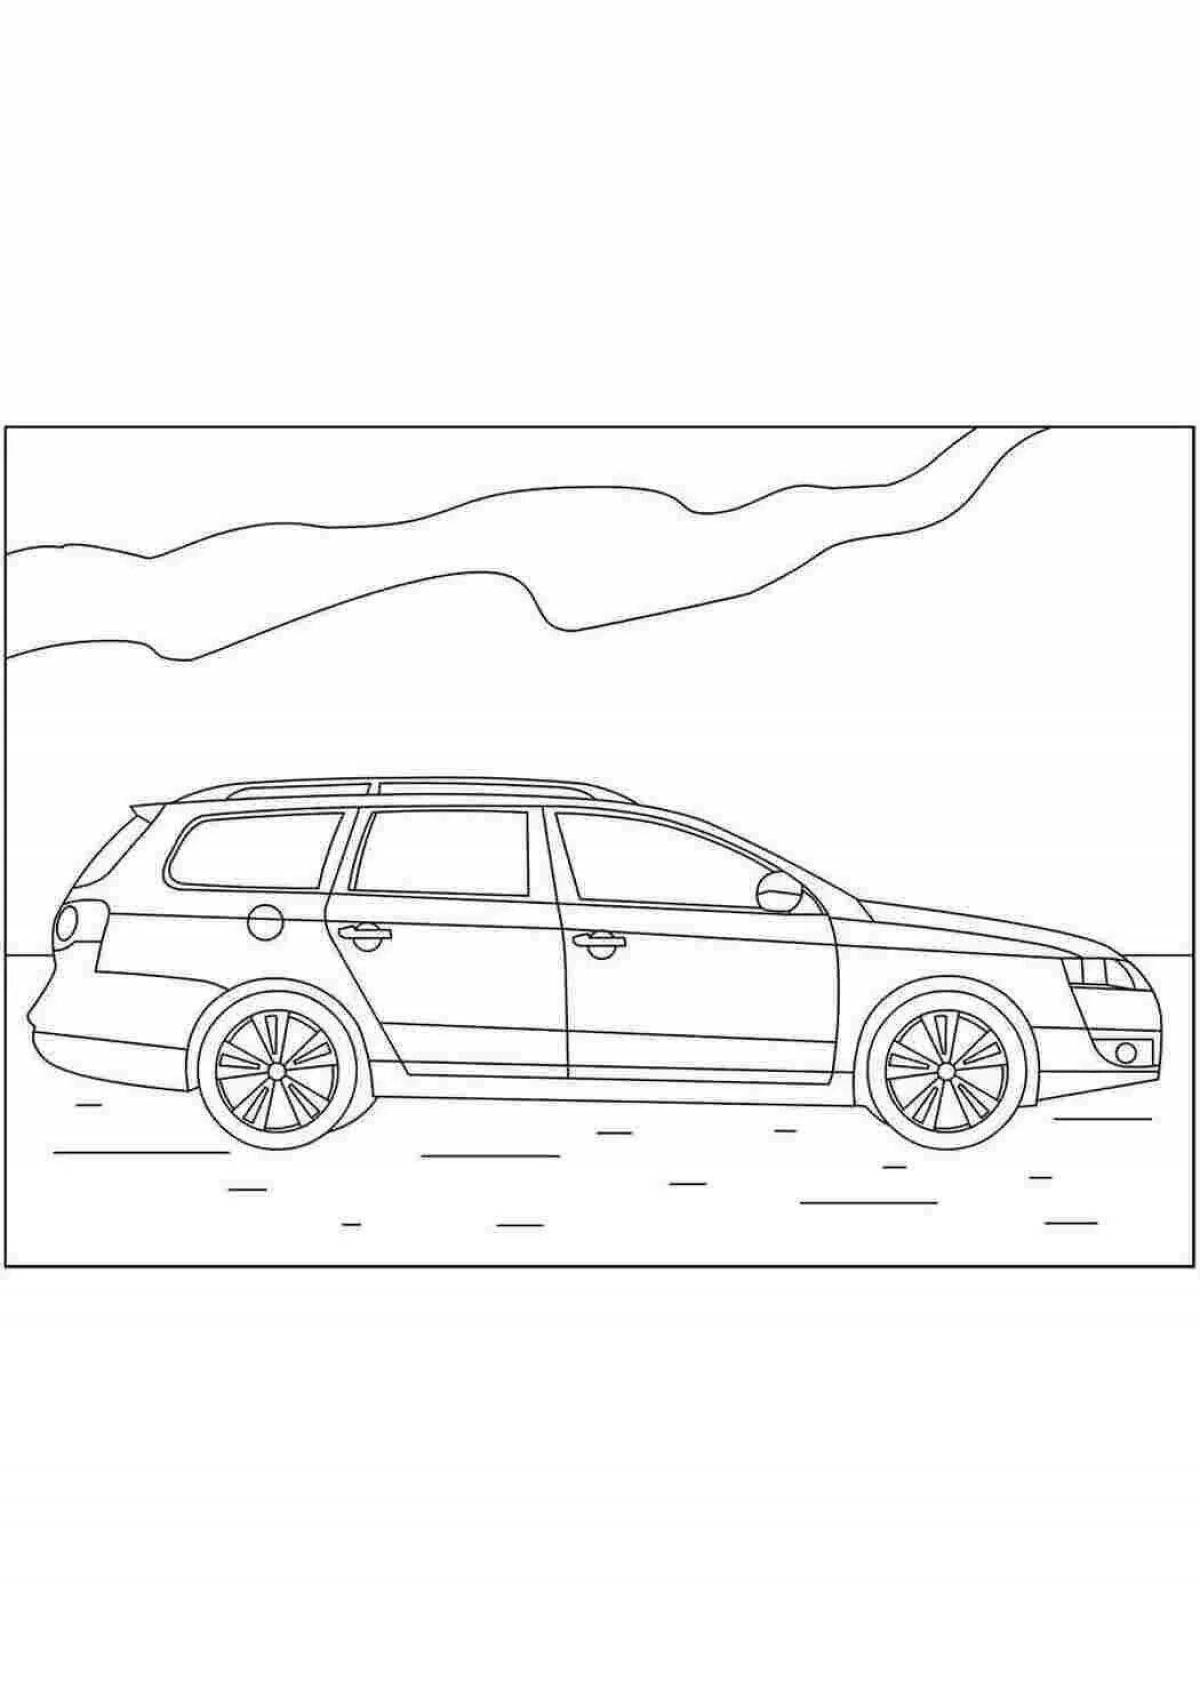 Coloring page with amazing volkswagen car